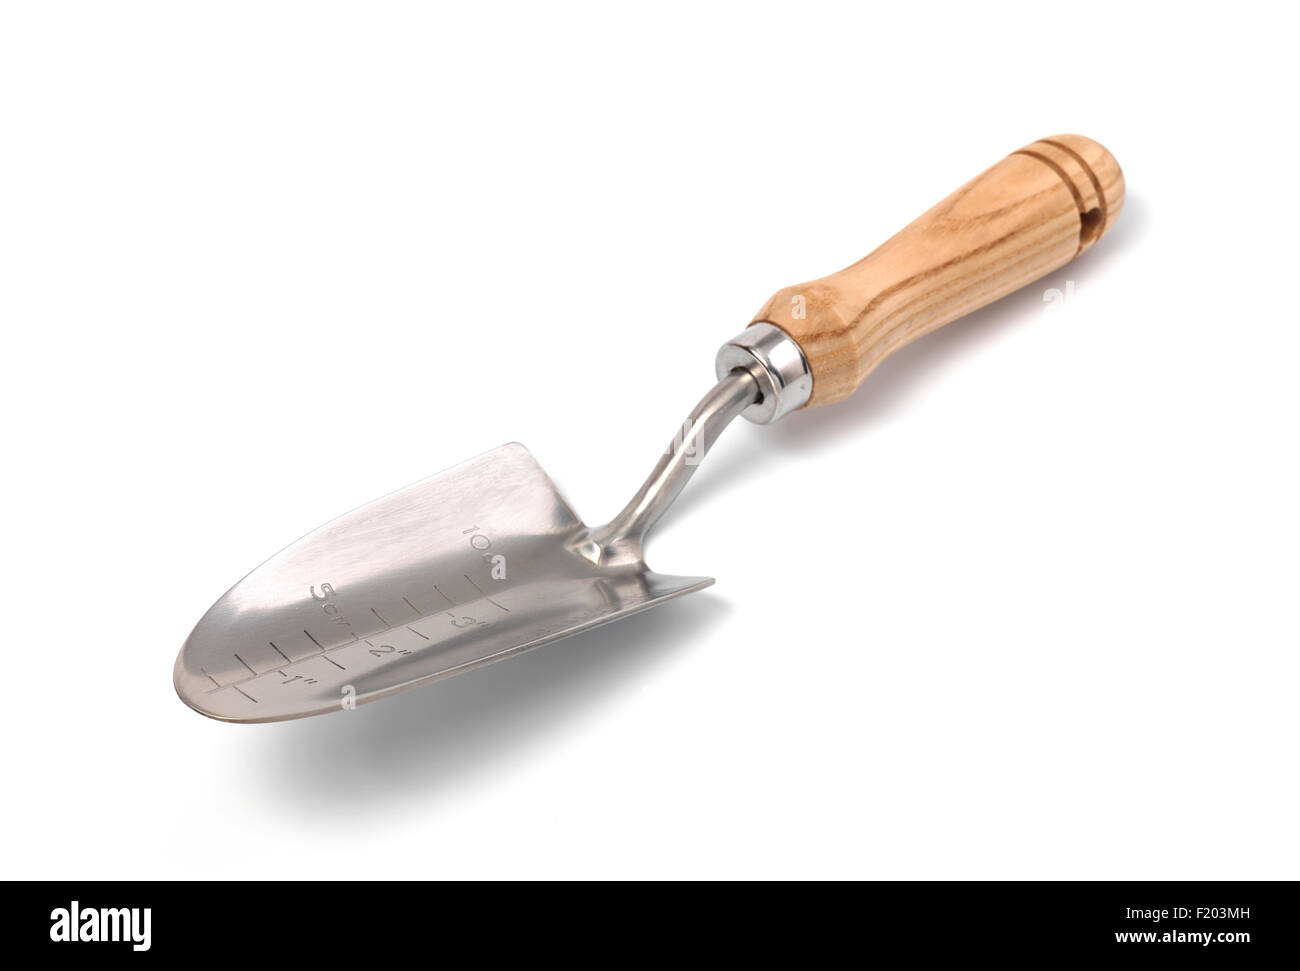 gardening trowel isolated on a white background Stock Photo